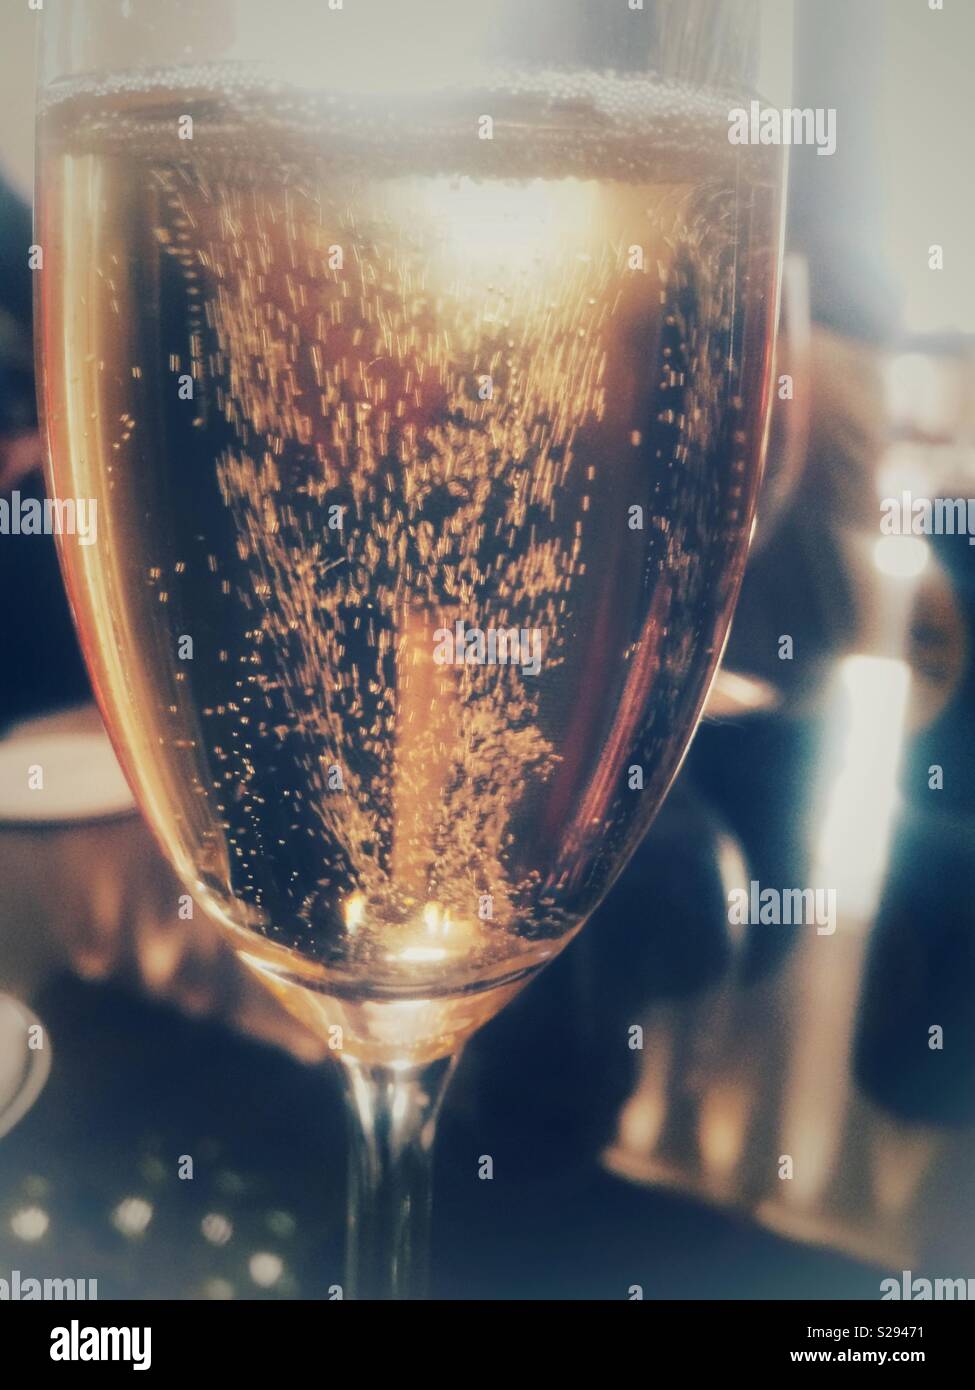 Champagne or sparkling wine bubbles rising in a freshly poured glass standing on a table waiting to be drunk Stock Photo